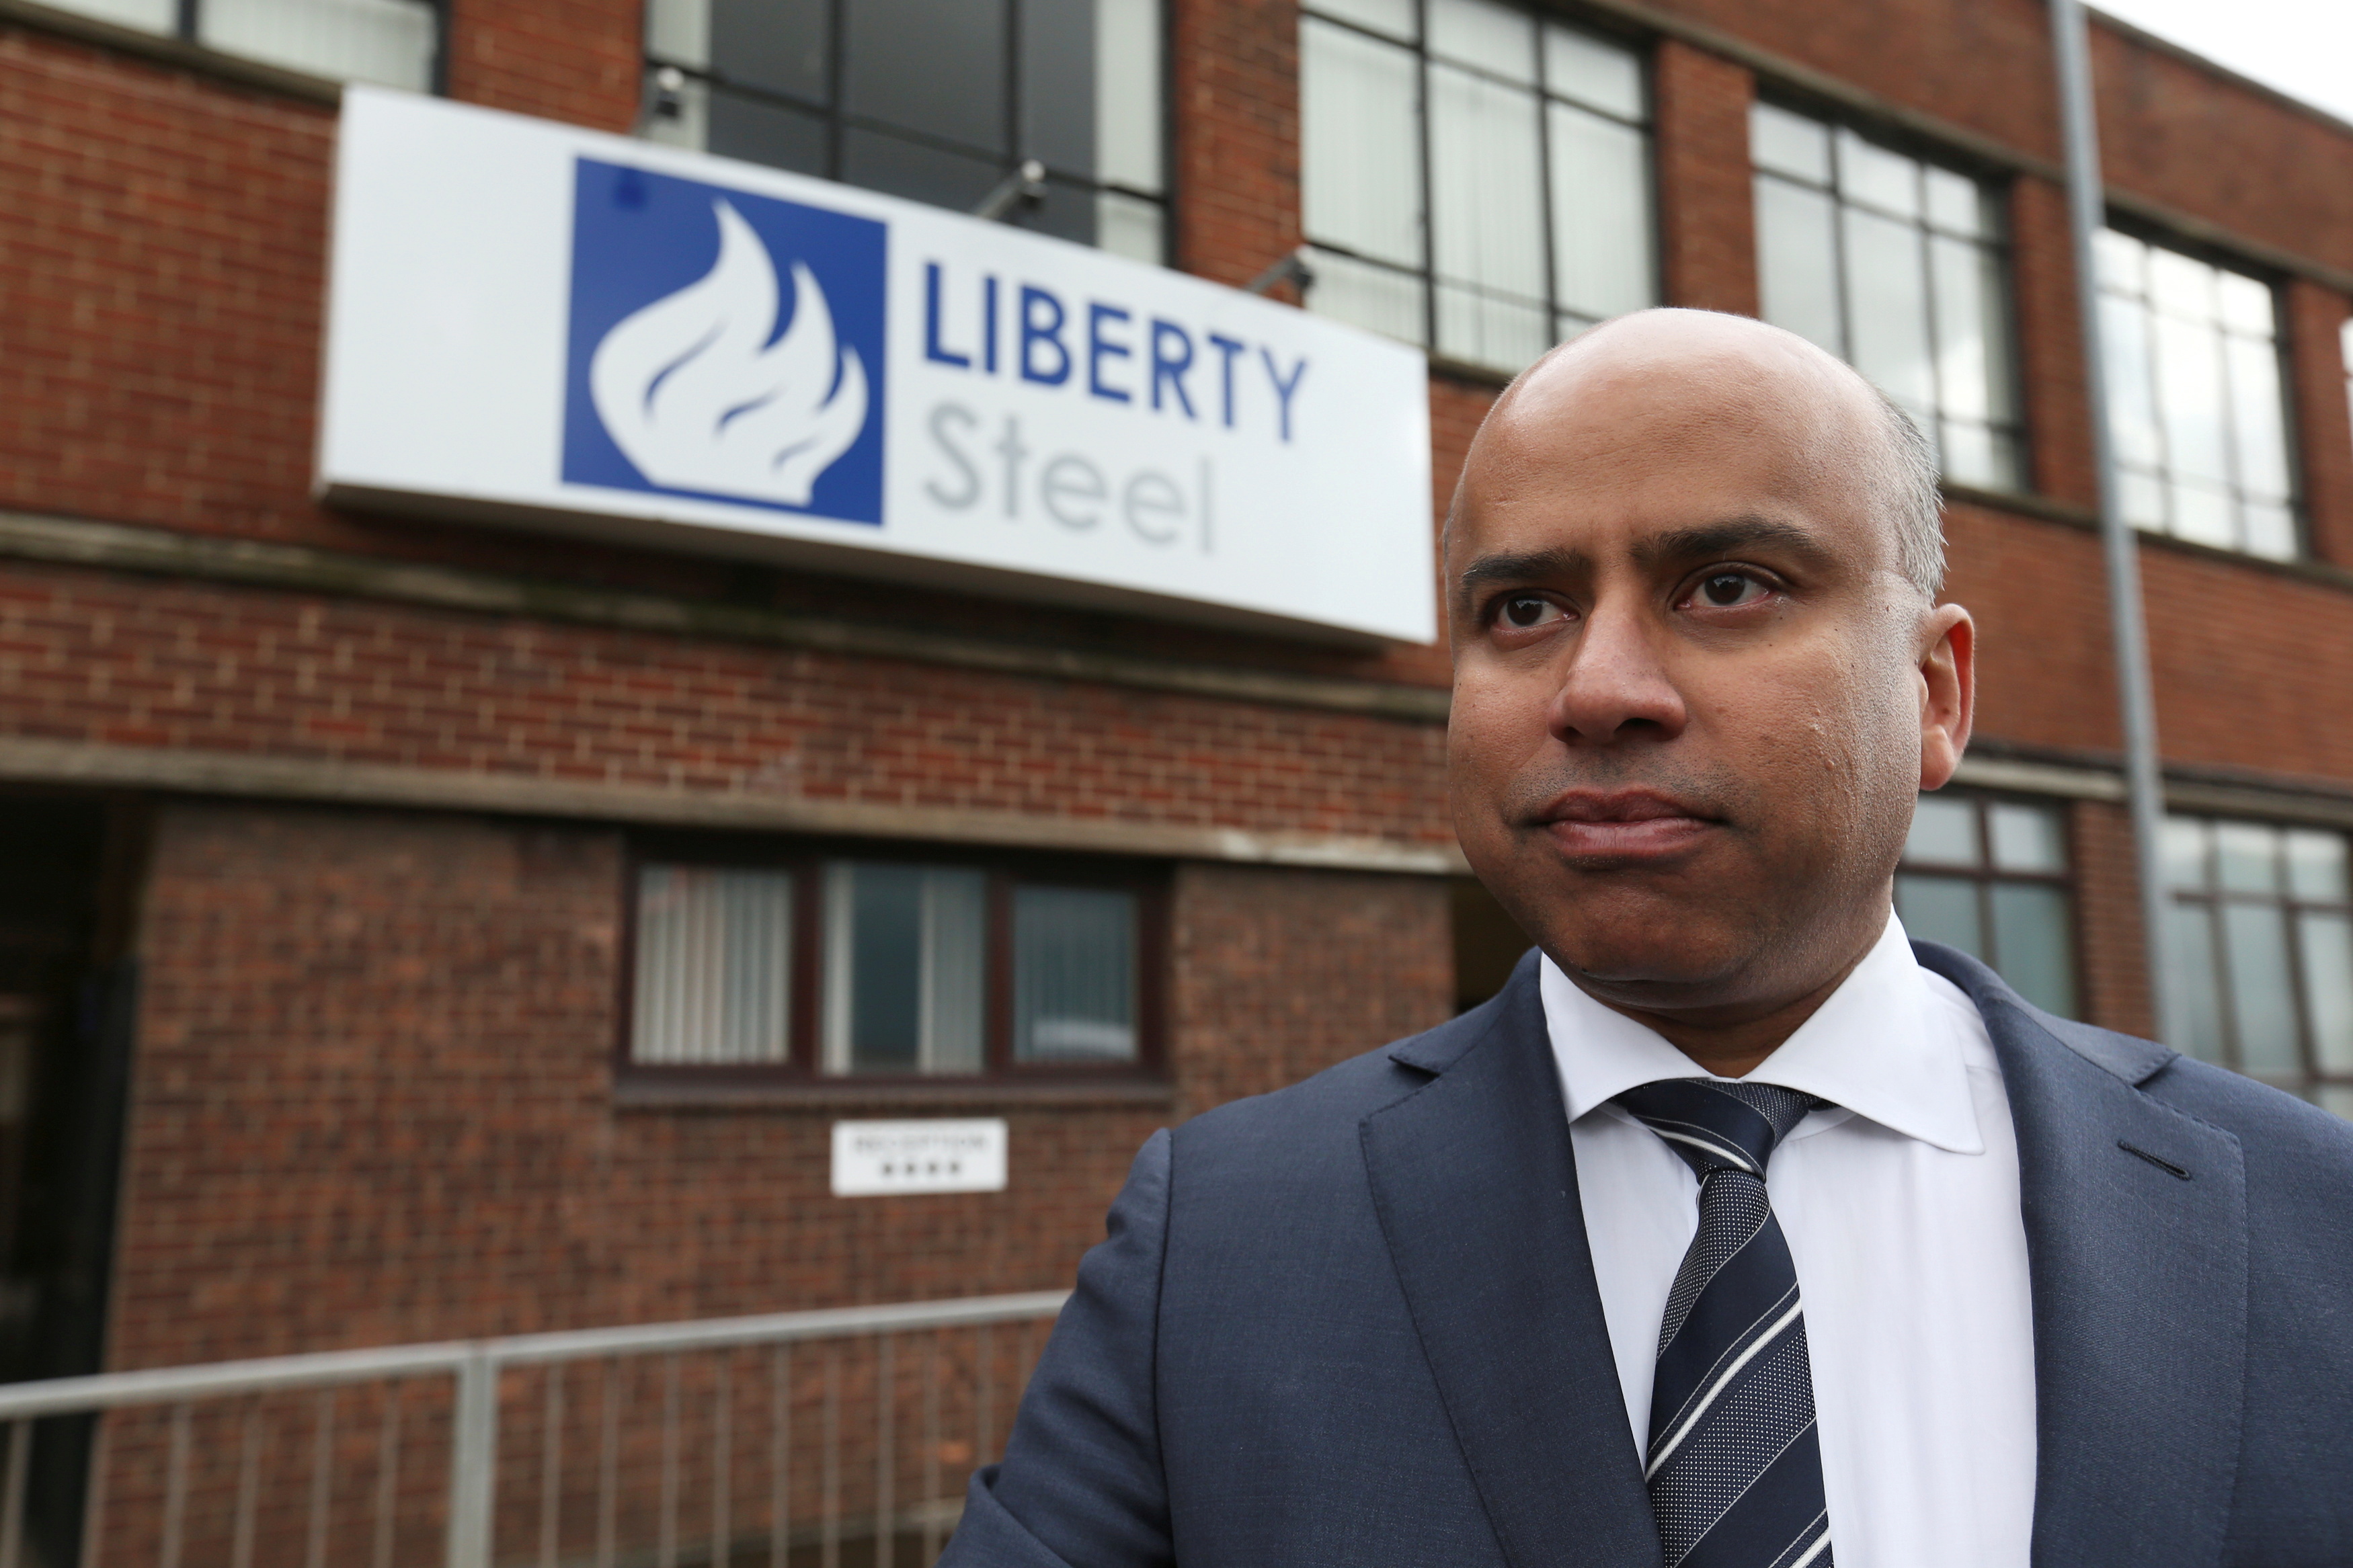 Liberty Steel boss Sanjeev Gupta stands outside steel pressing mill in Dalzell after completing its purchase, Scotland, Britain April 8, 2016. REUTERS/Russell Cheyne/File Photo